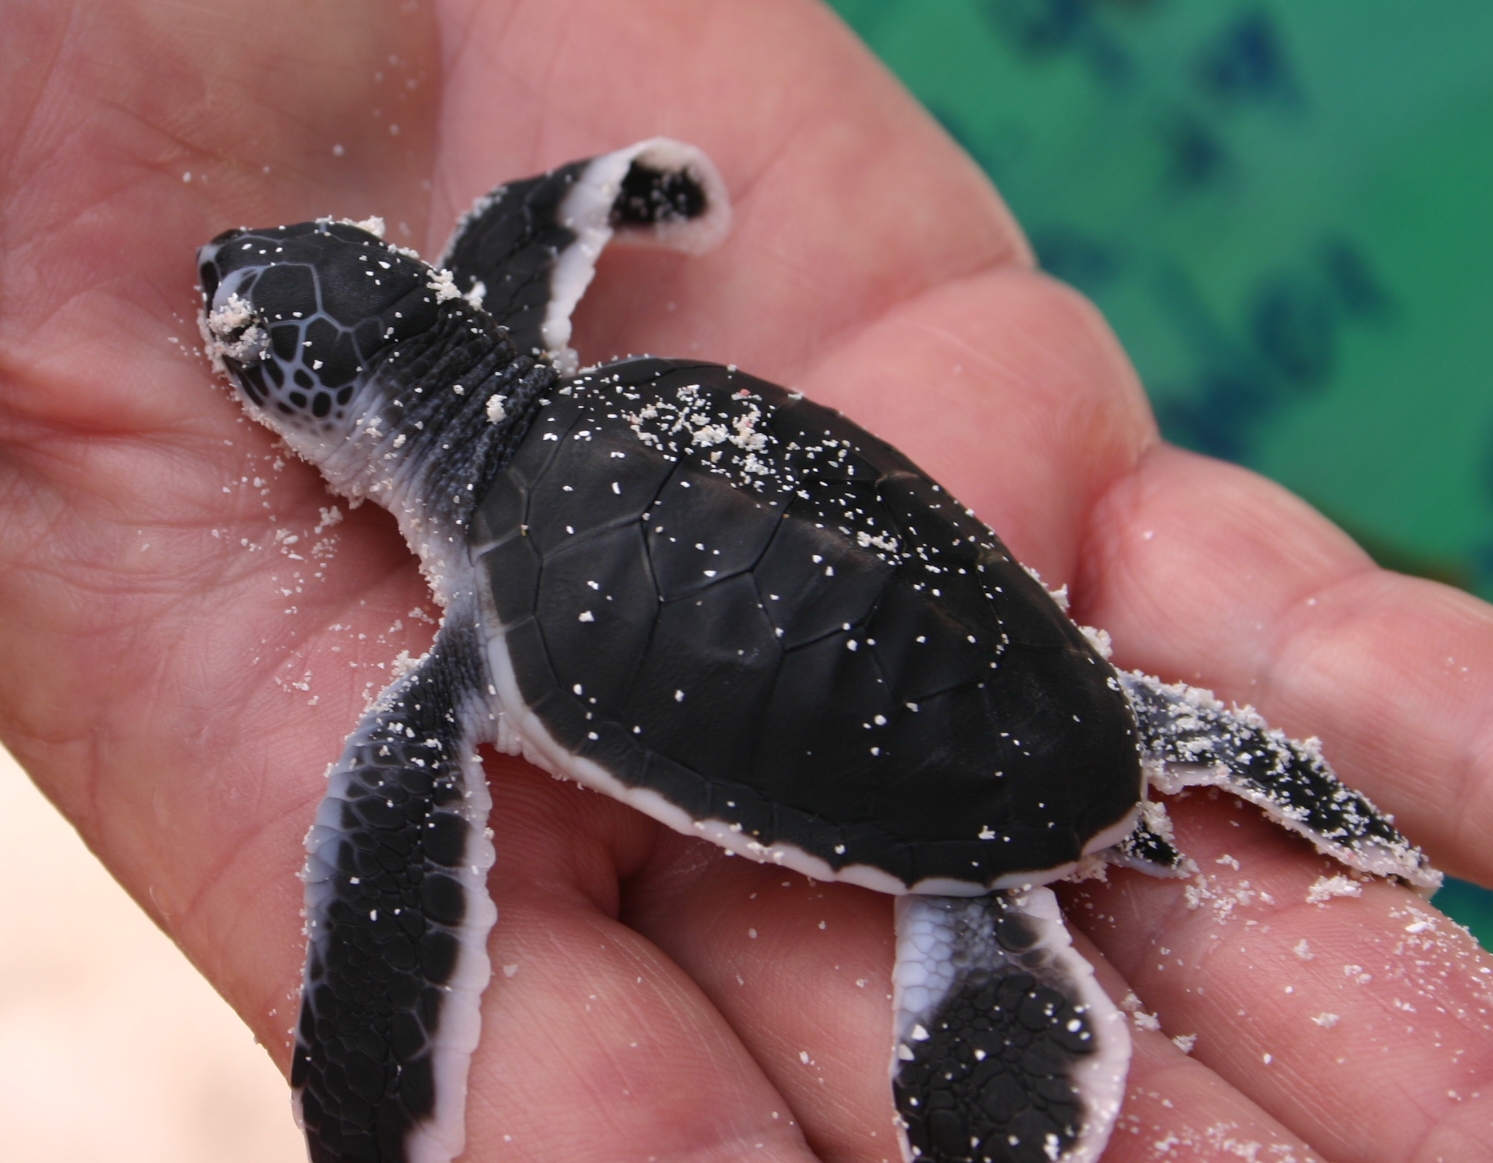 A green turtle just hatched on the hand of someone